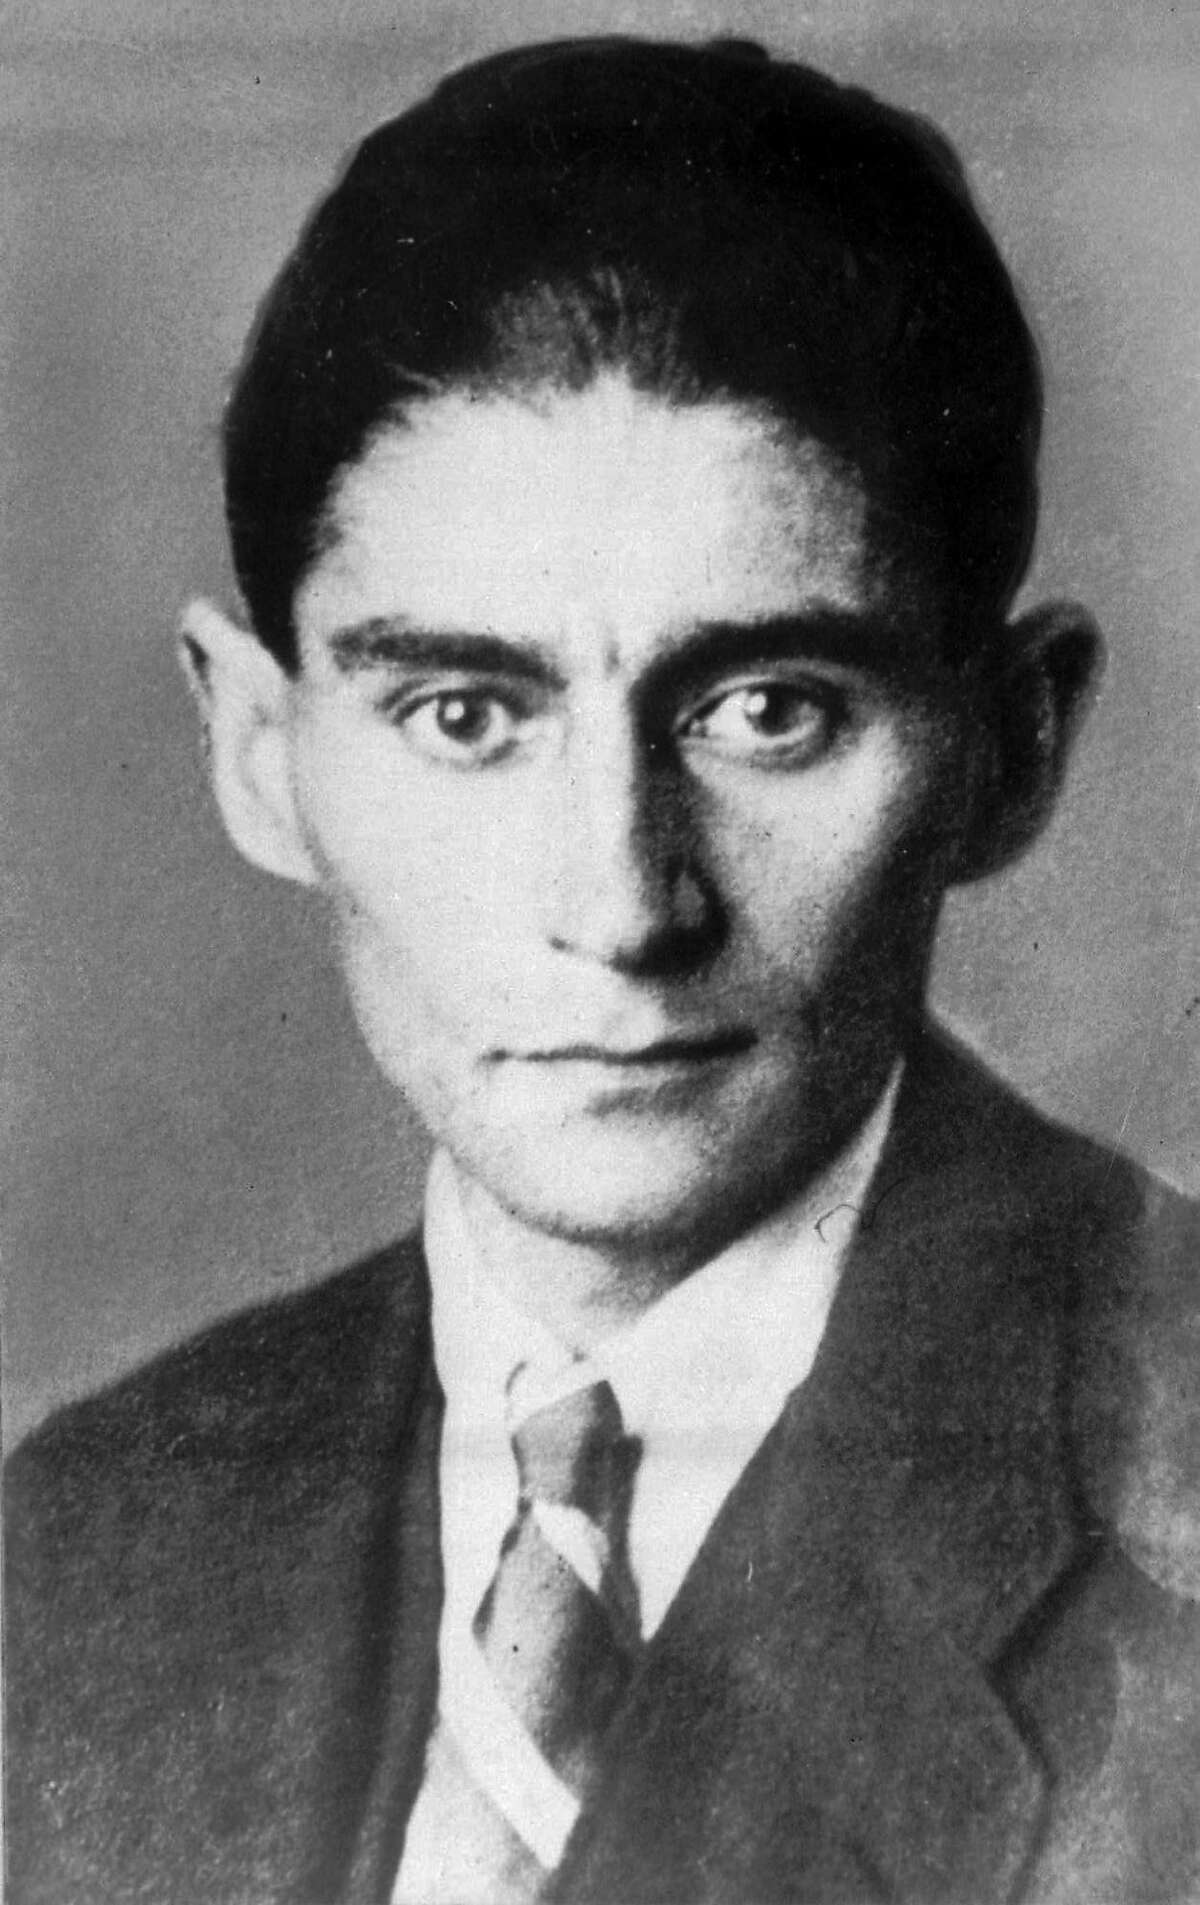 Undated handout file photo of author Franz Kafka. It could shed light on one of literature's darkest figures: A long-hidden trove of never-published writings by Franz Kafka retrieved from safety deposit boxes where they have sat for decades. Over the past week, the pages have been pulled out of 10 safety deposit boxes in Tel Aviv and Zurich, Switzerland, on the order of an Israeli court over the objections of two elderly women who claim to have inherited them from their mother.